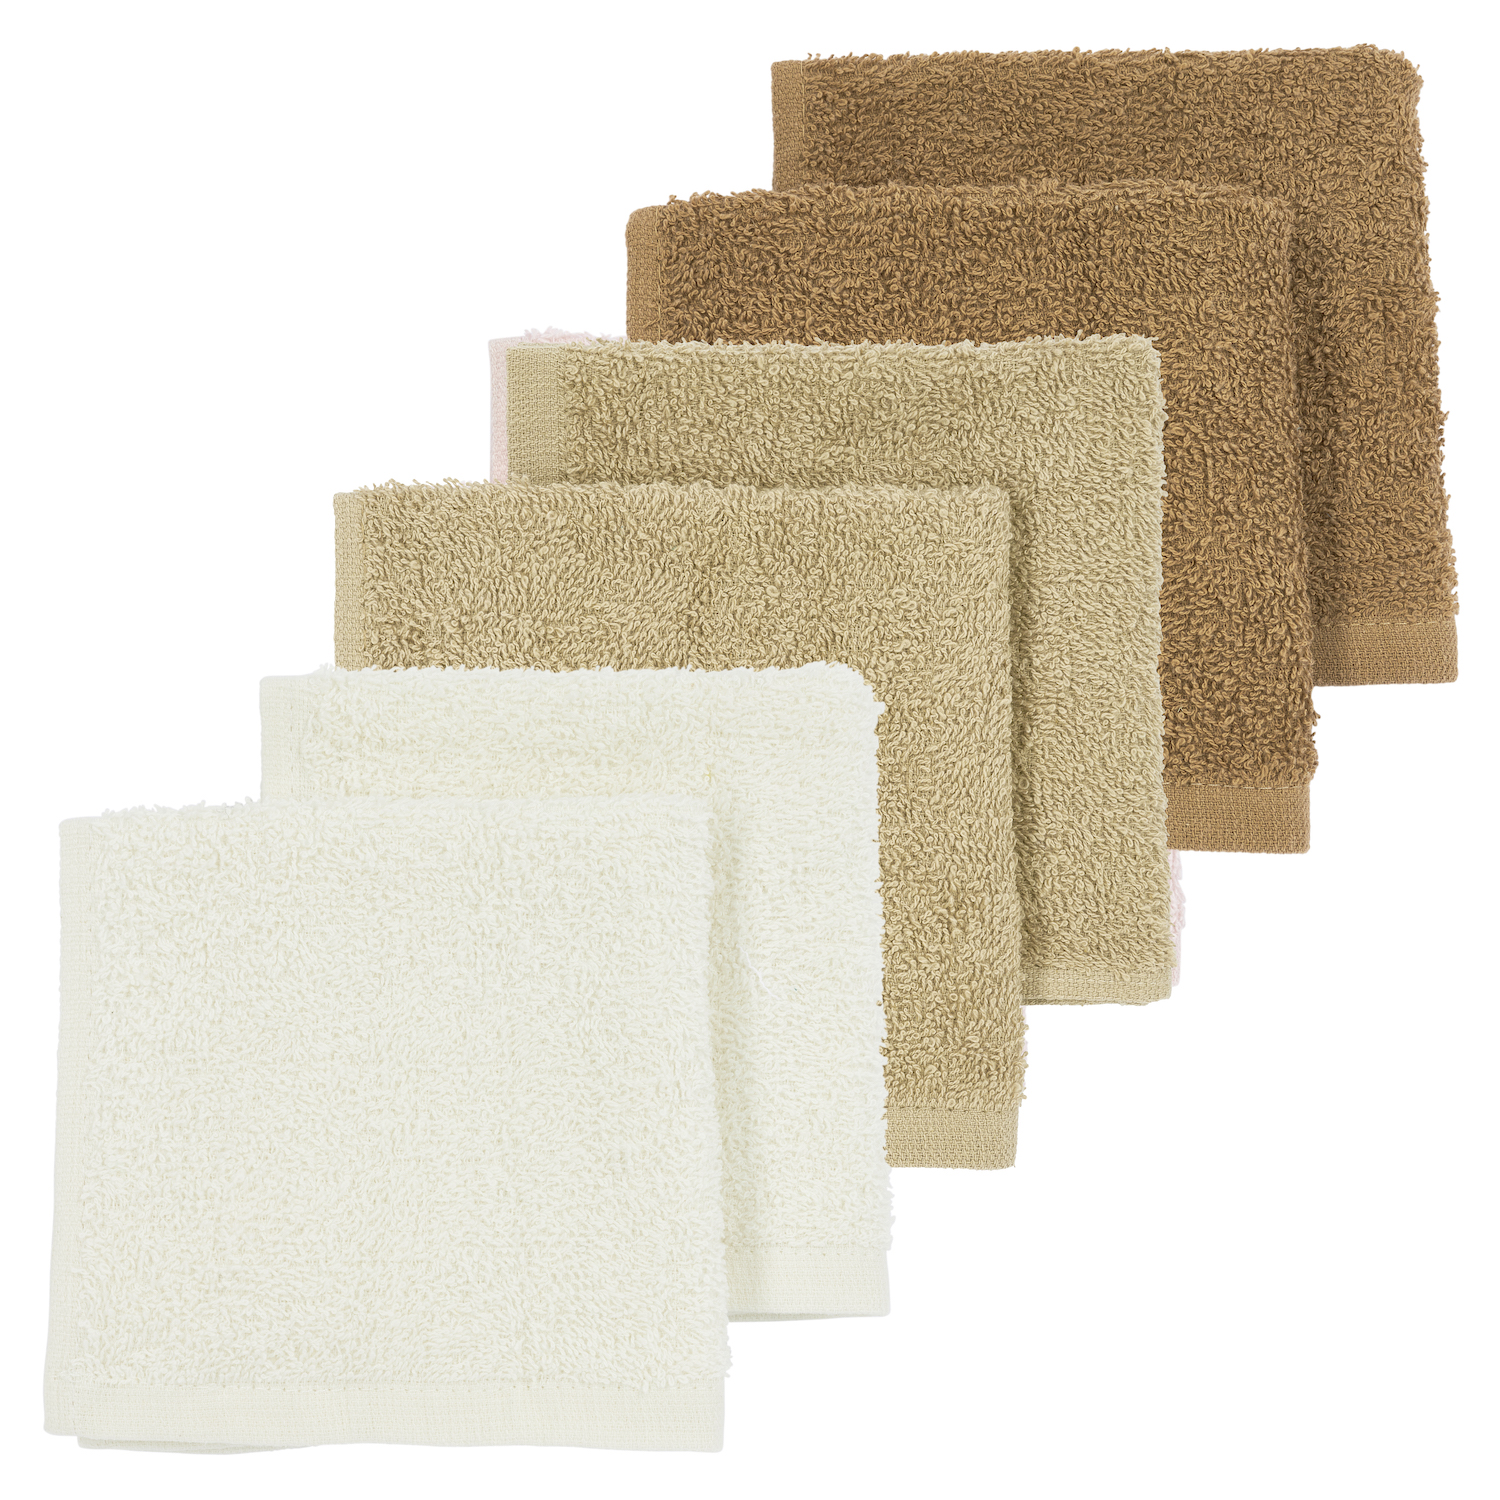 Basic Terry Face Cloths 6-pack - Offwhite/Sand/Toffee - 30x30cm